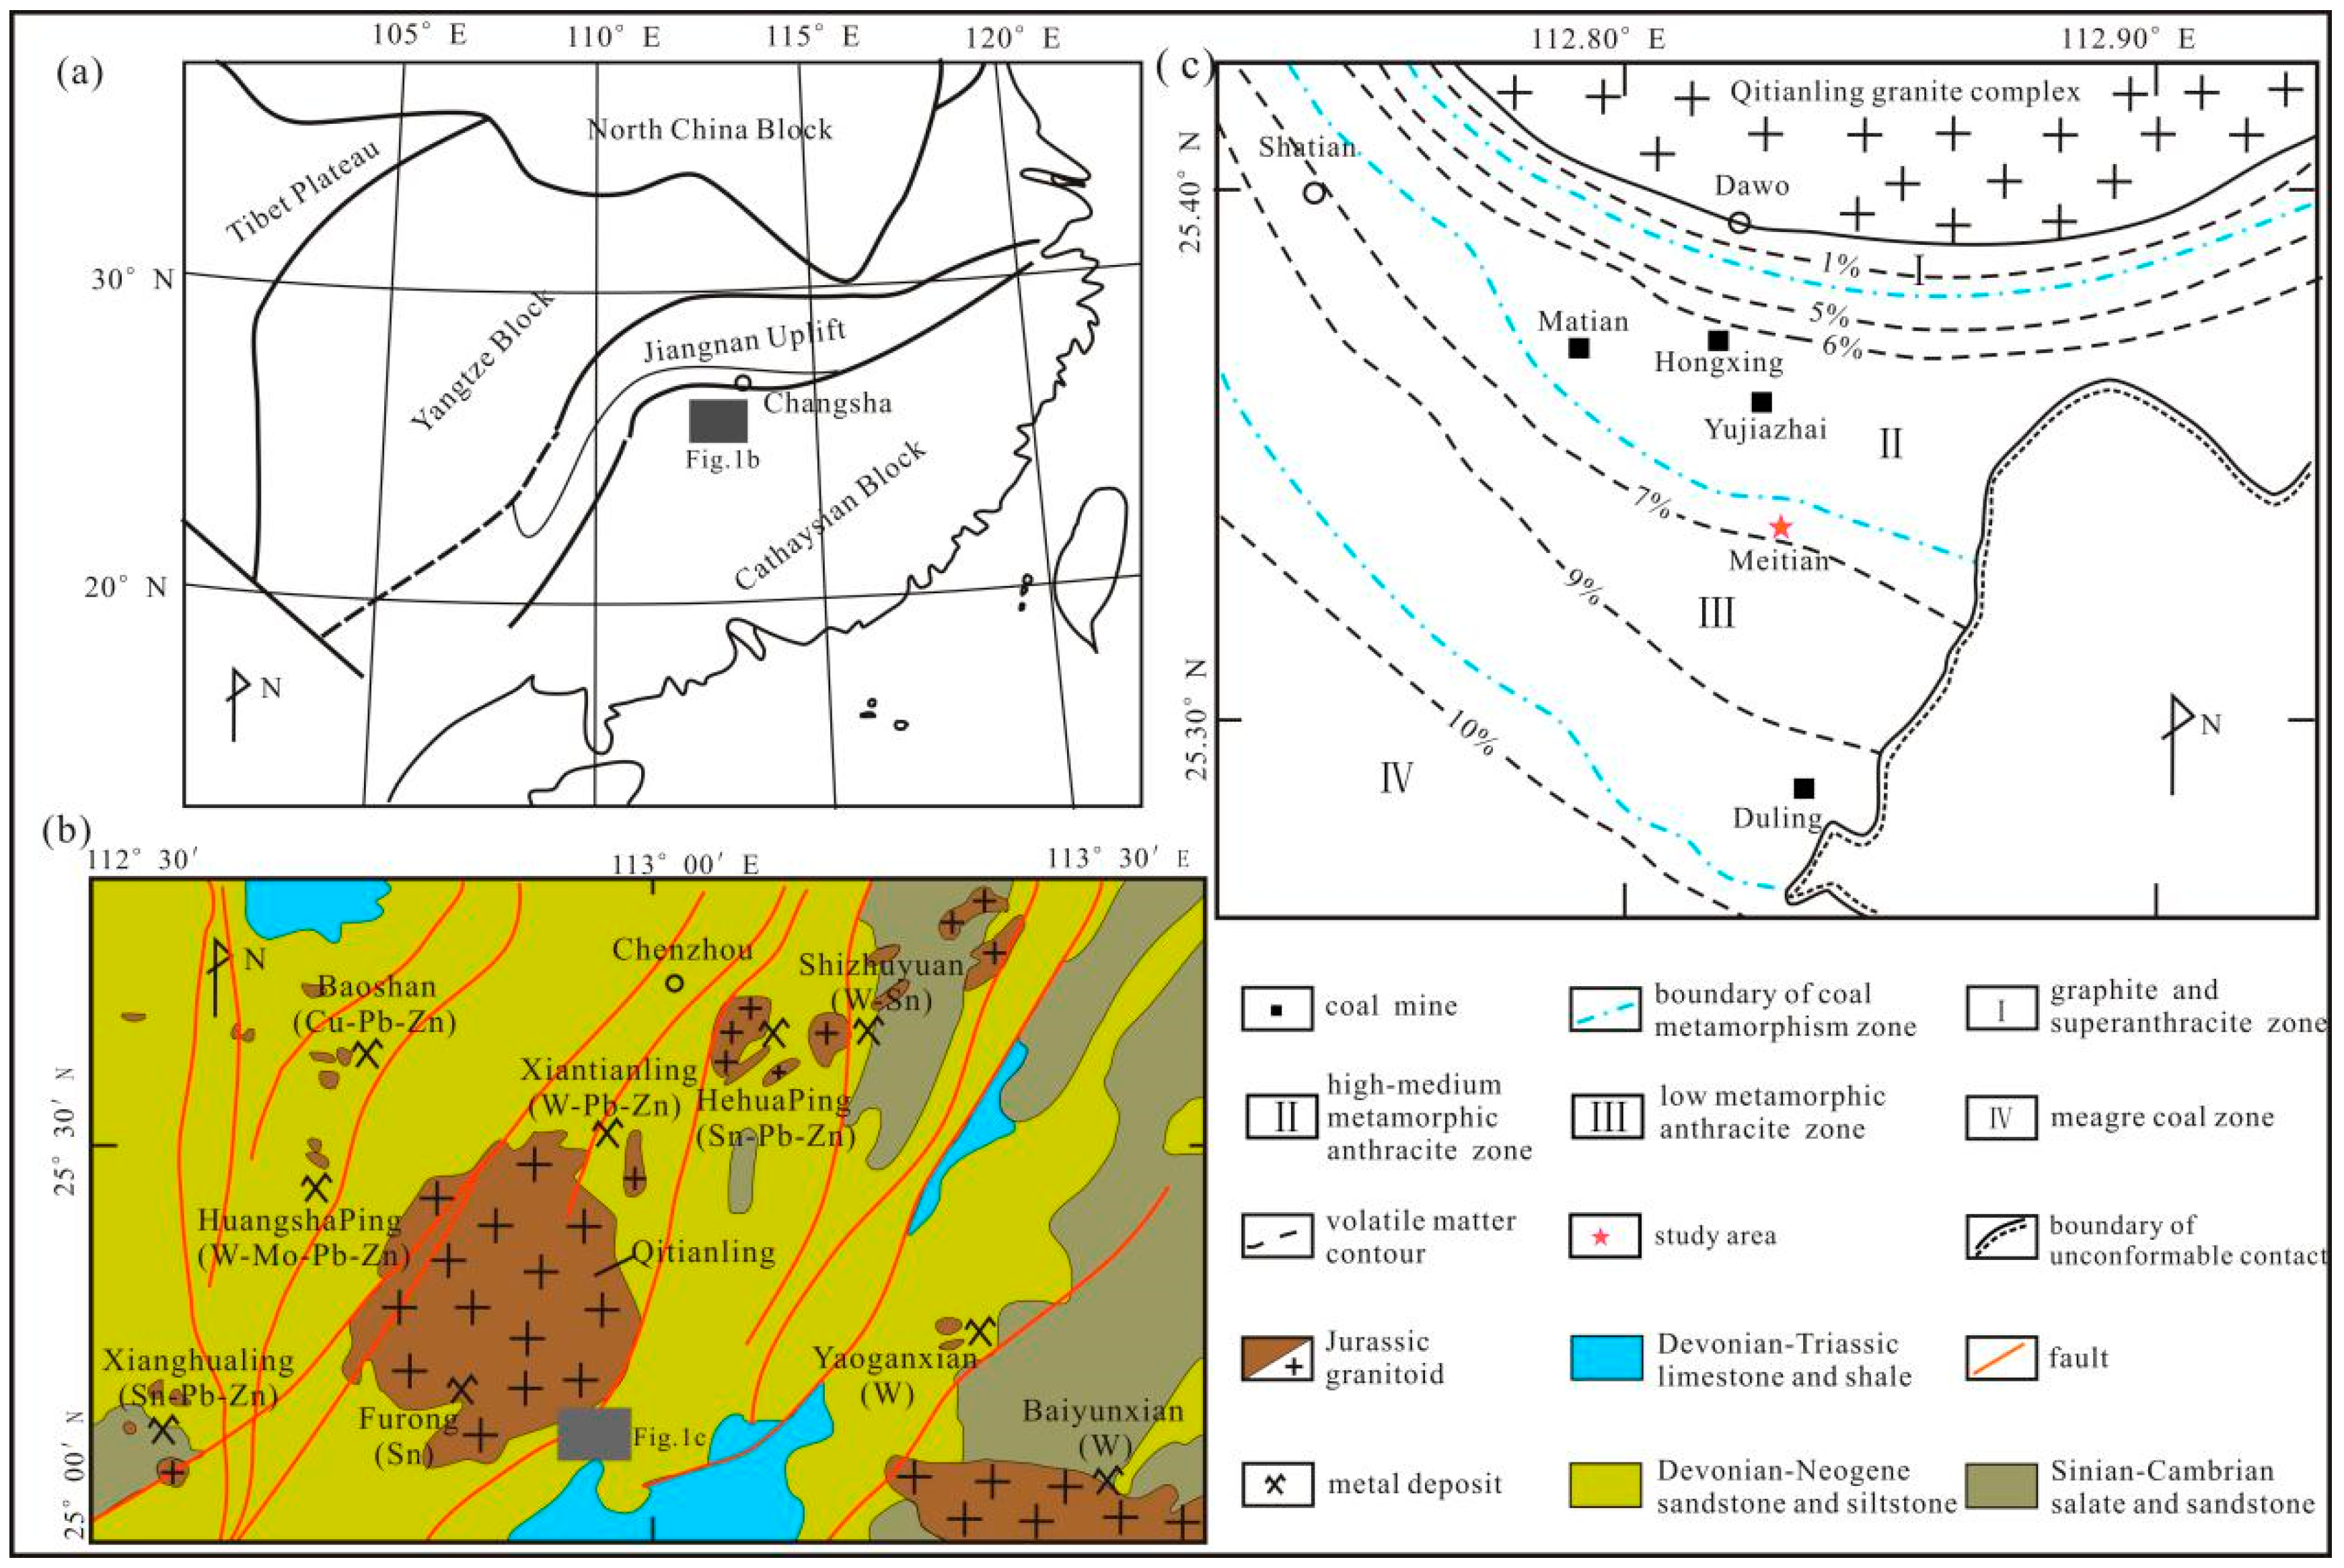 Minerals Free Full Text Minerals And Enrichment Of W Rb And Cs In Late Permian Coal From Meitian Mine Meitian Coalfield Southern China By Magmatic Hydrothermal Fluids Html